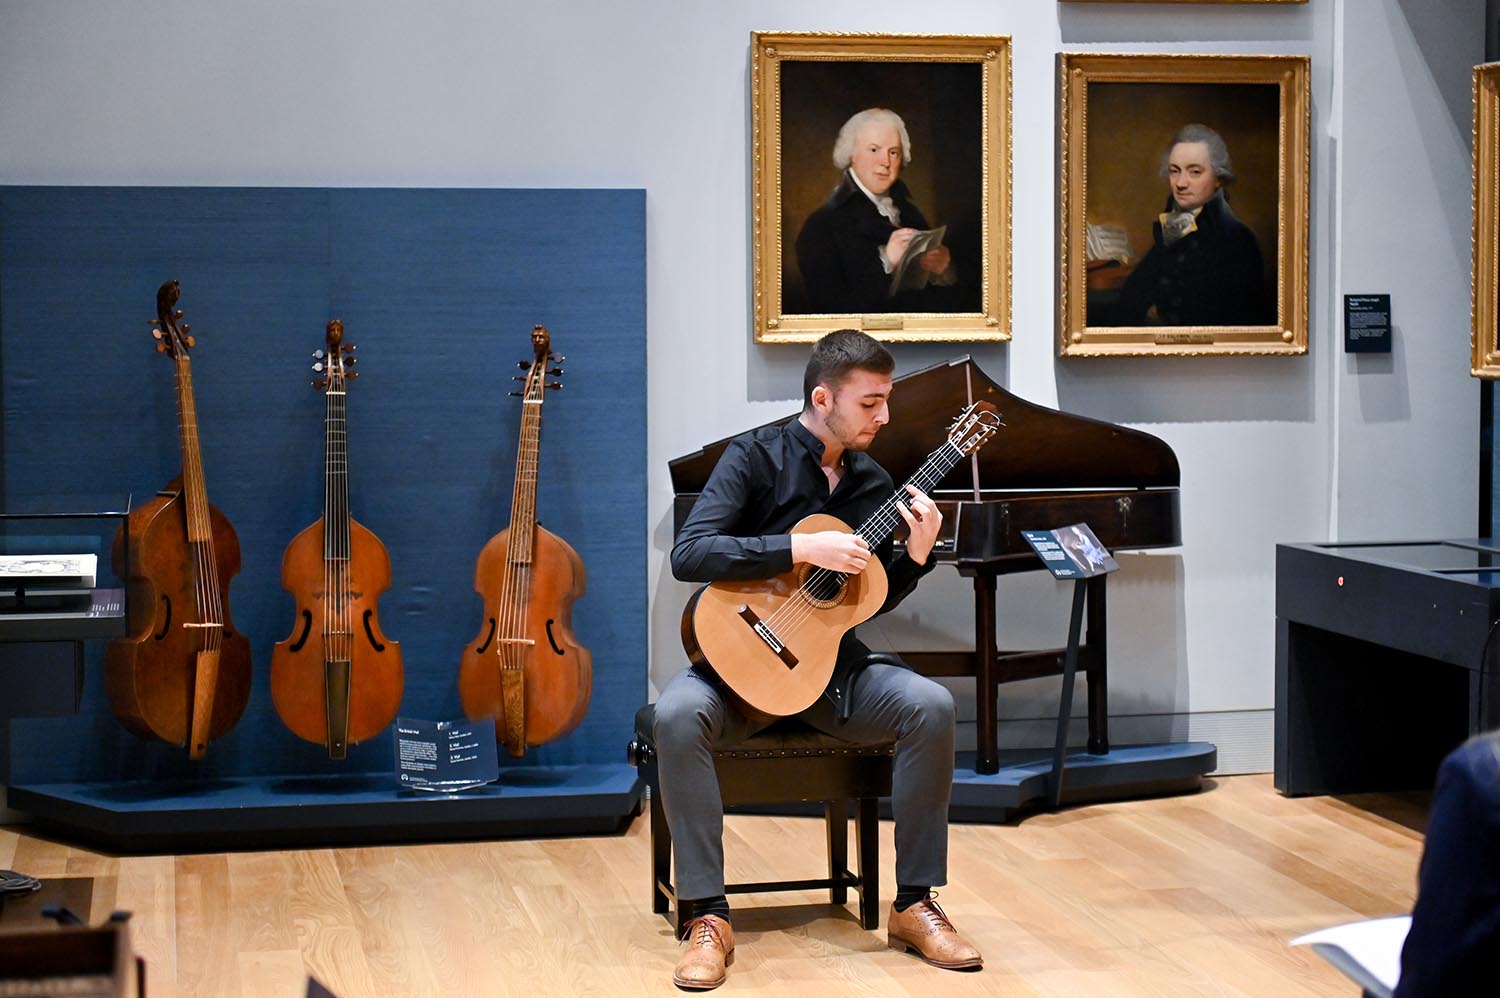 A guitarist wearing black performs in the RCM Museum in front of paintings and historical instruments